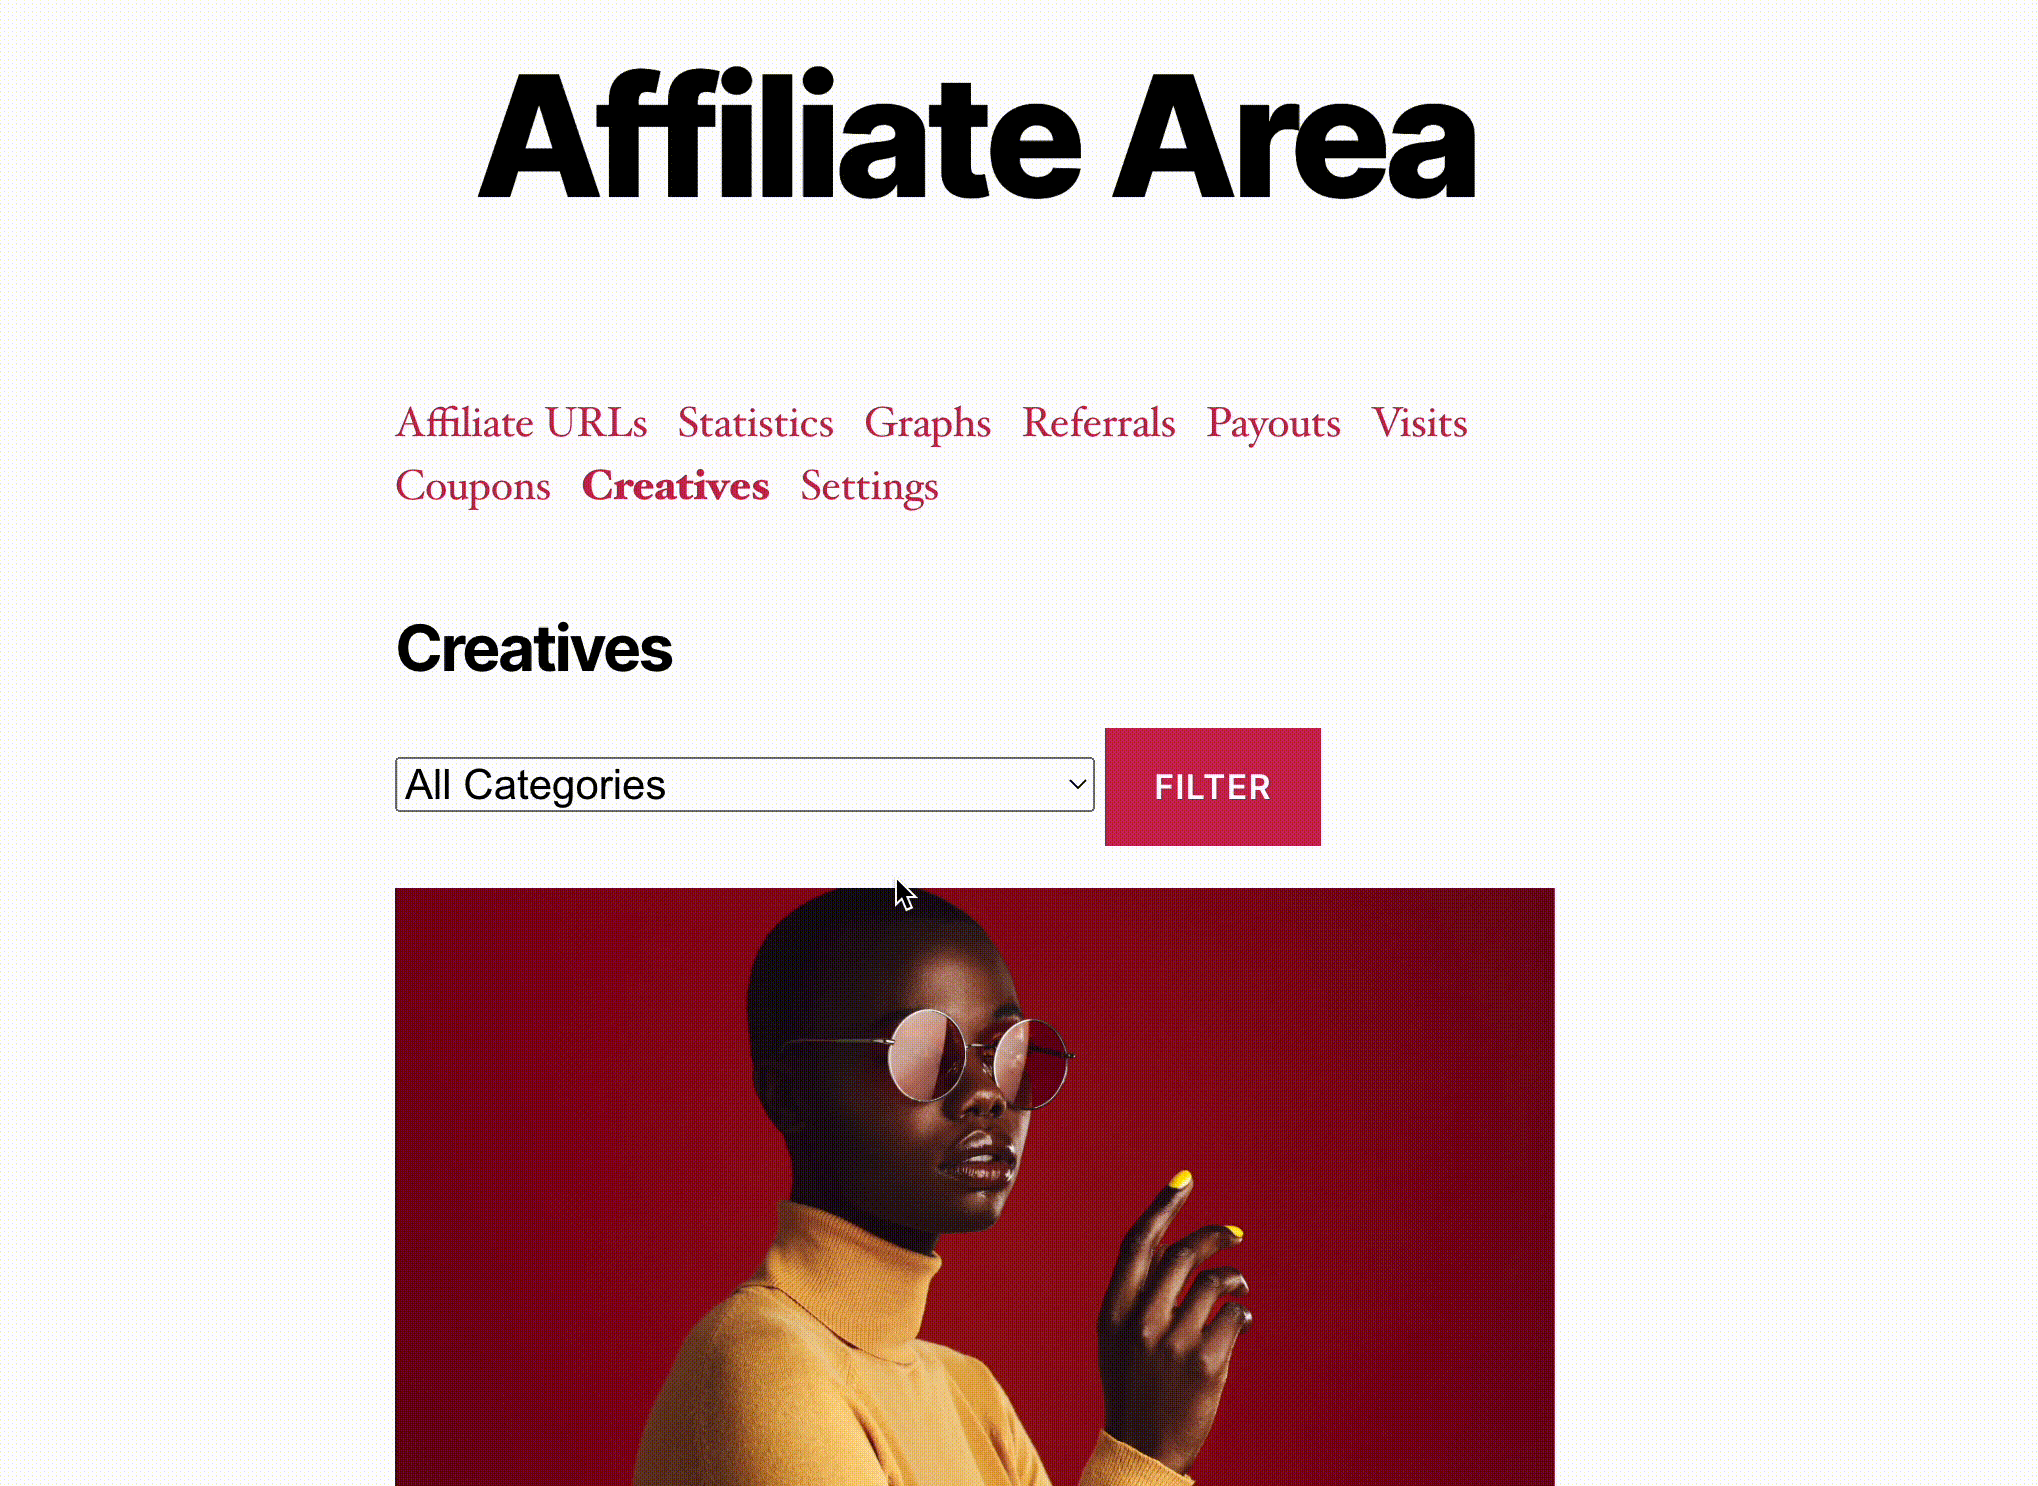 View creatives in the affiliate area